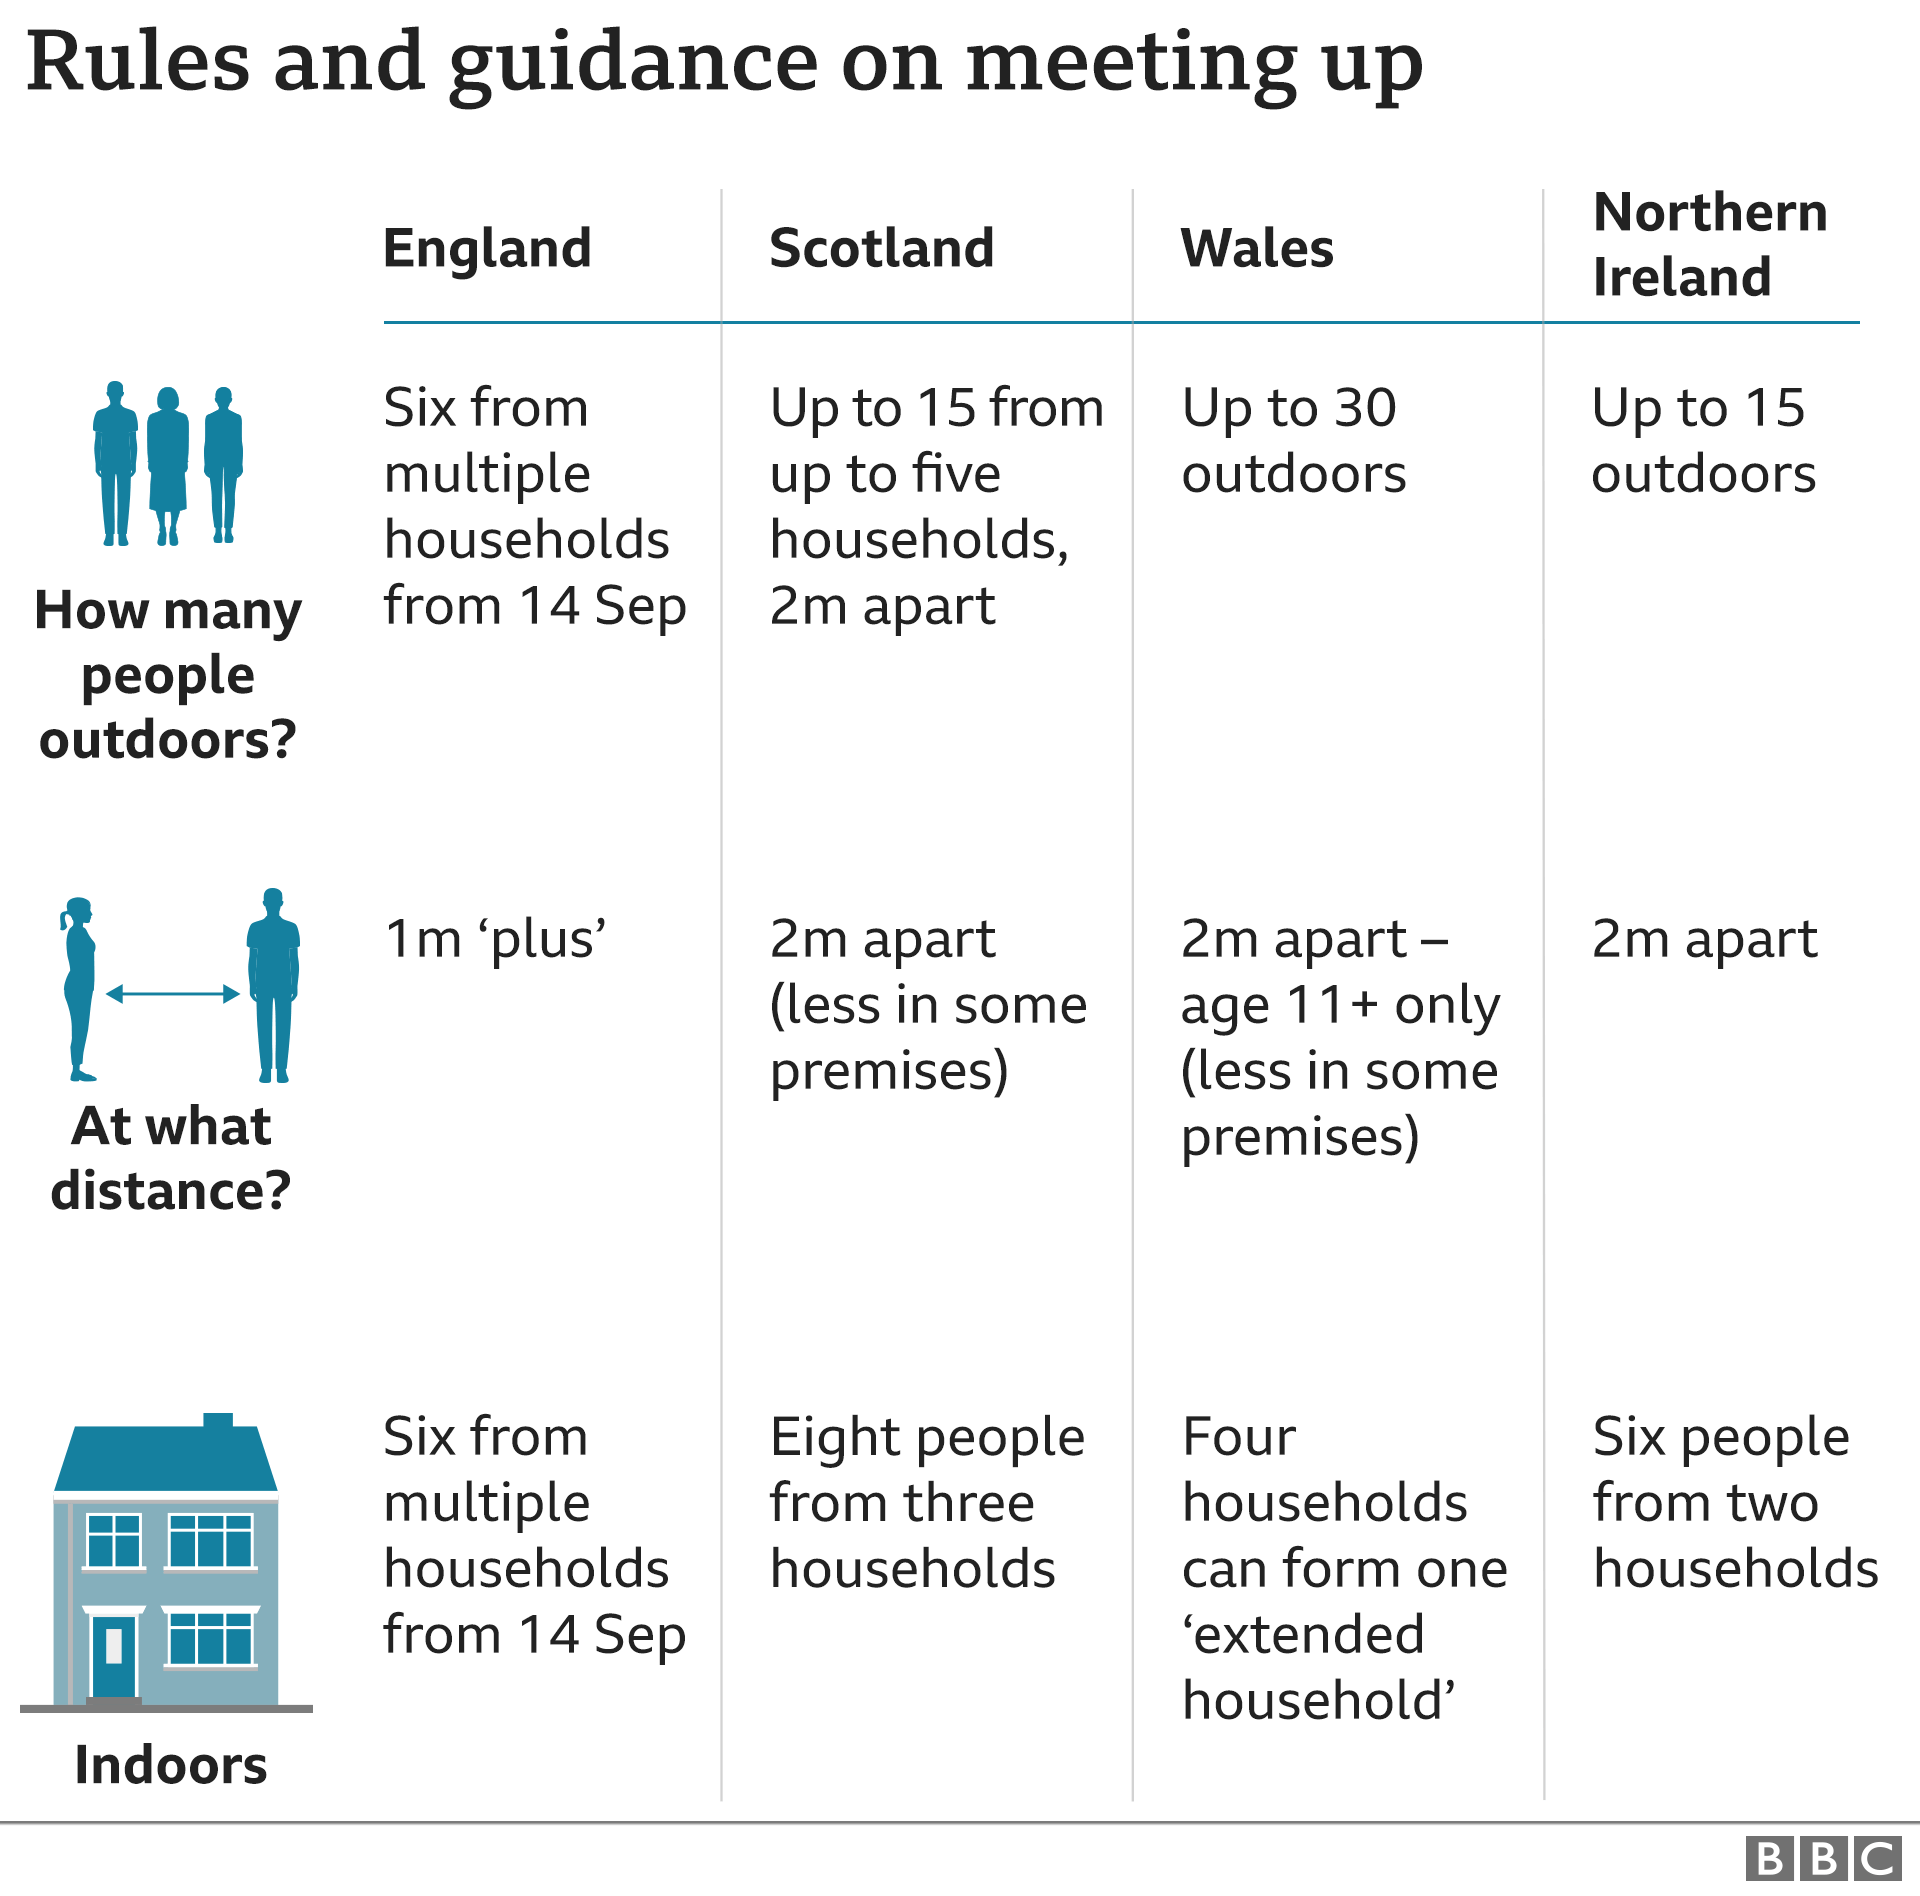 Rules and guidance meeting up - 9 Sept